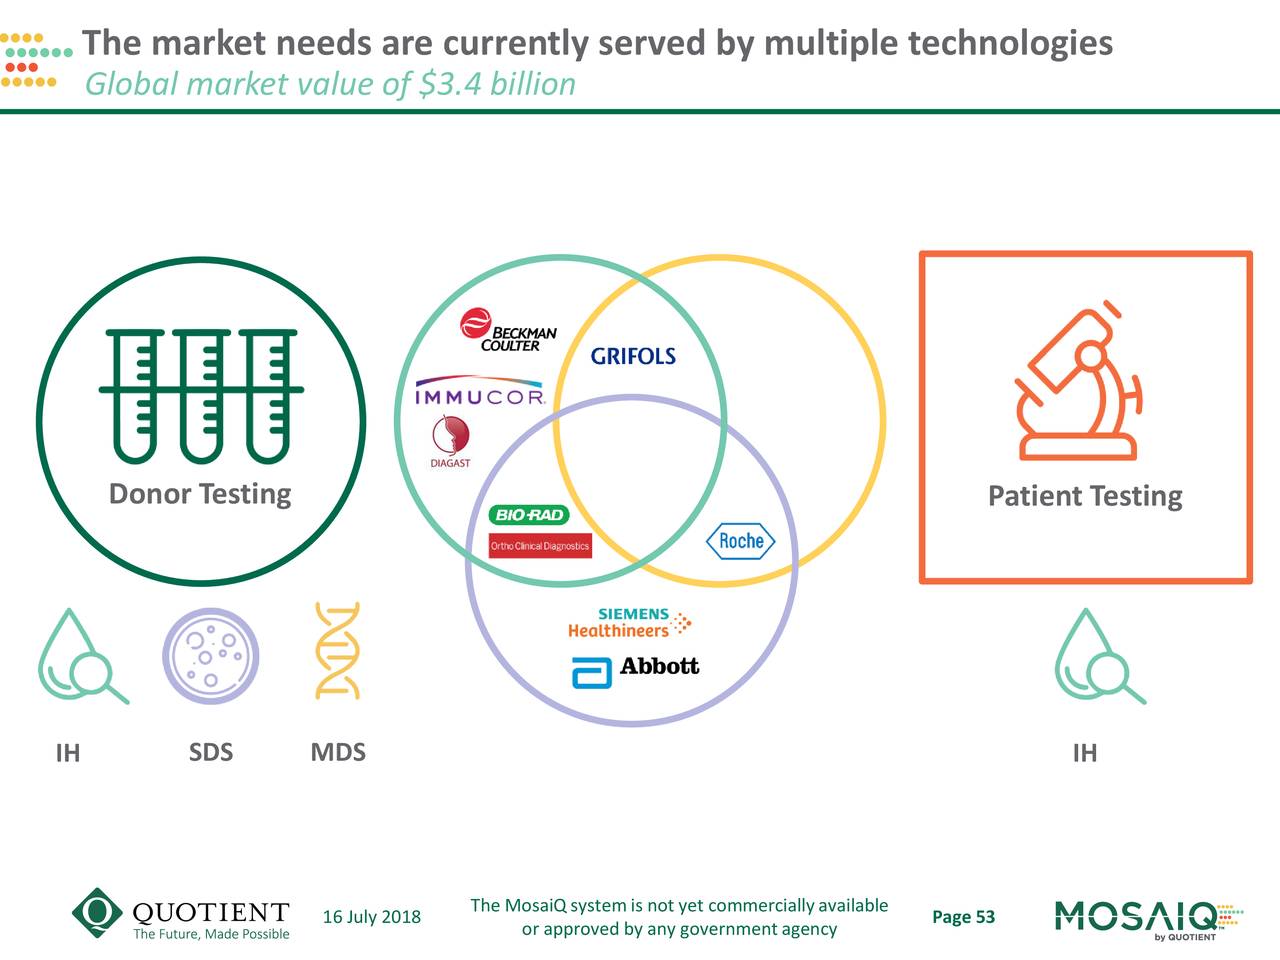 The market needs are currently served by multiple technologies